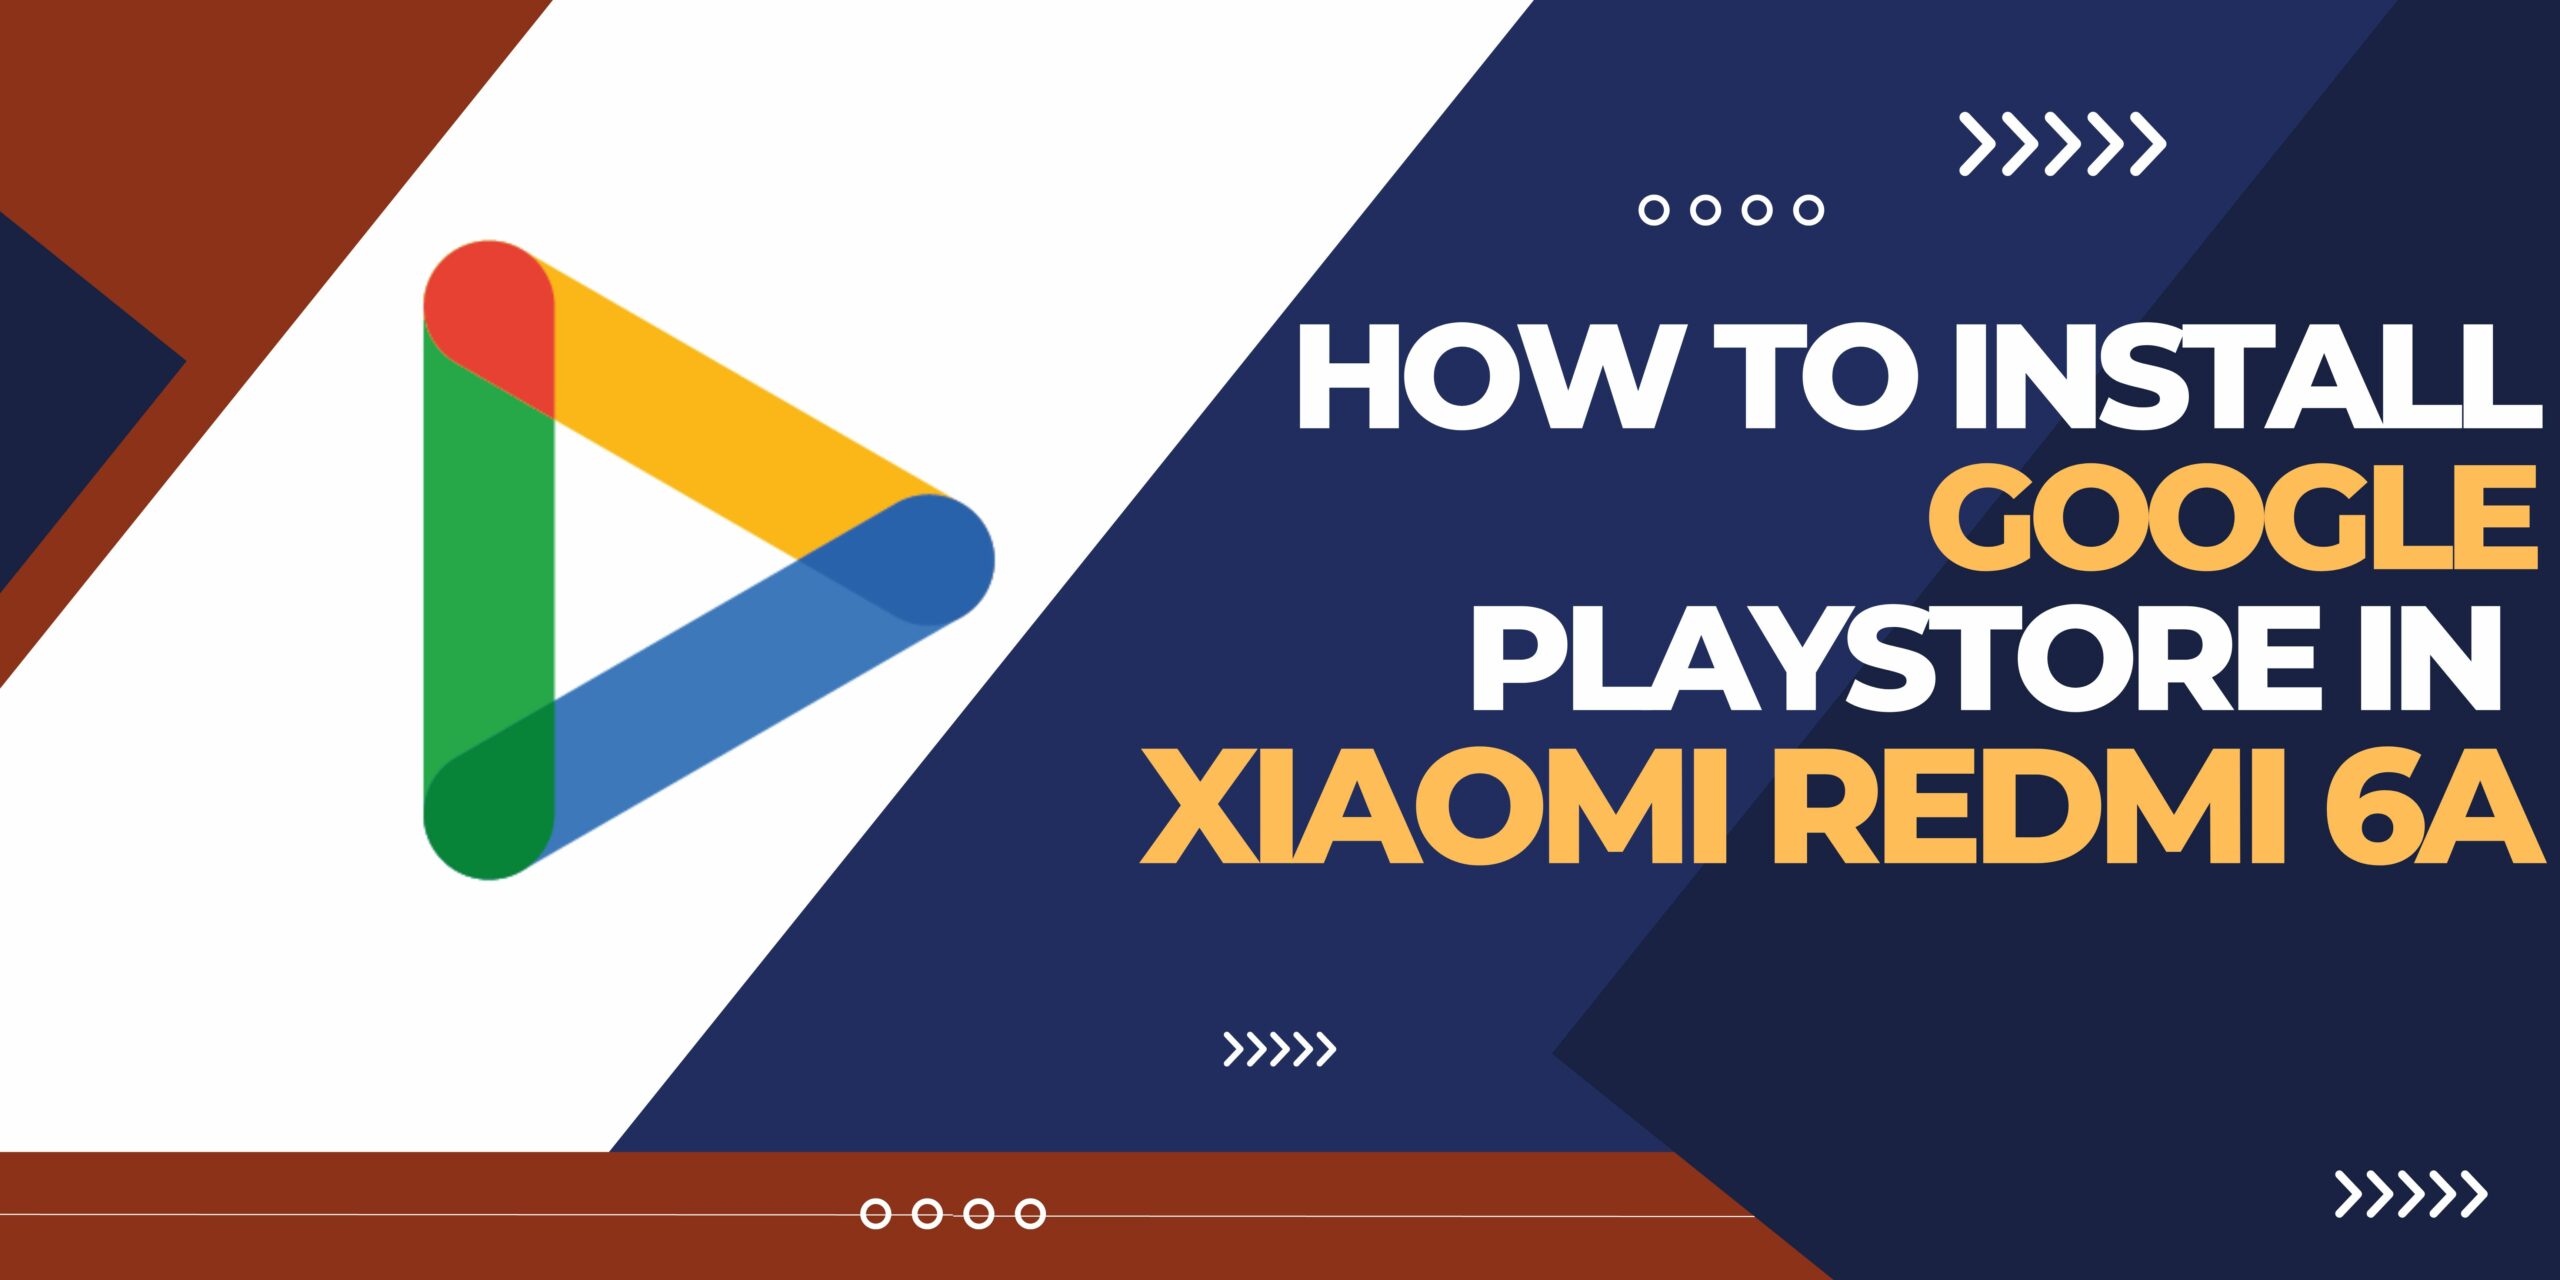 an image of How to Install Google Playstore in Xiaomi Redmi 6a